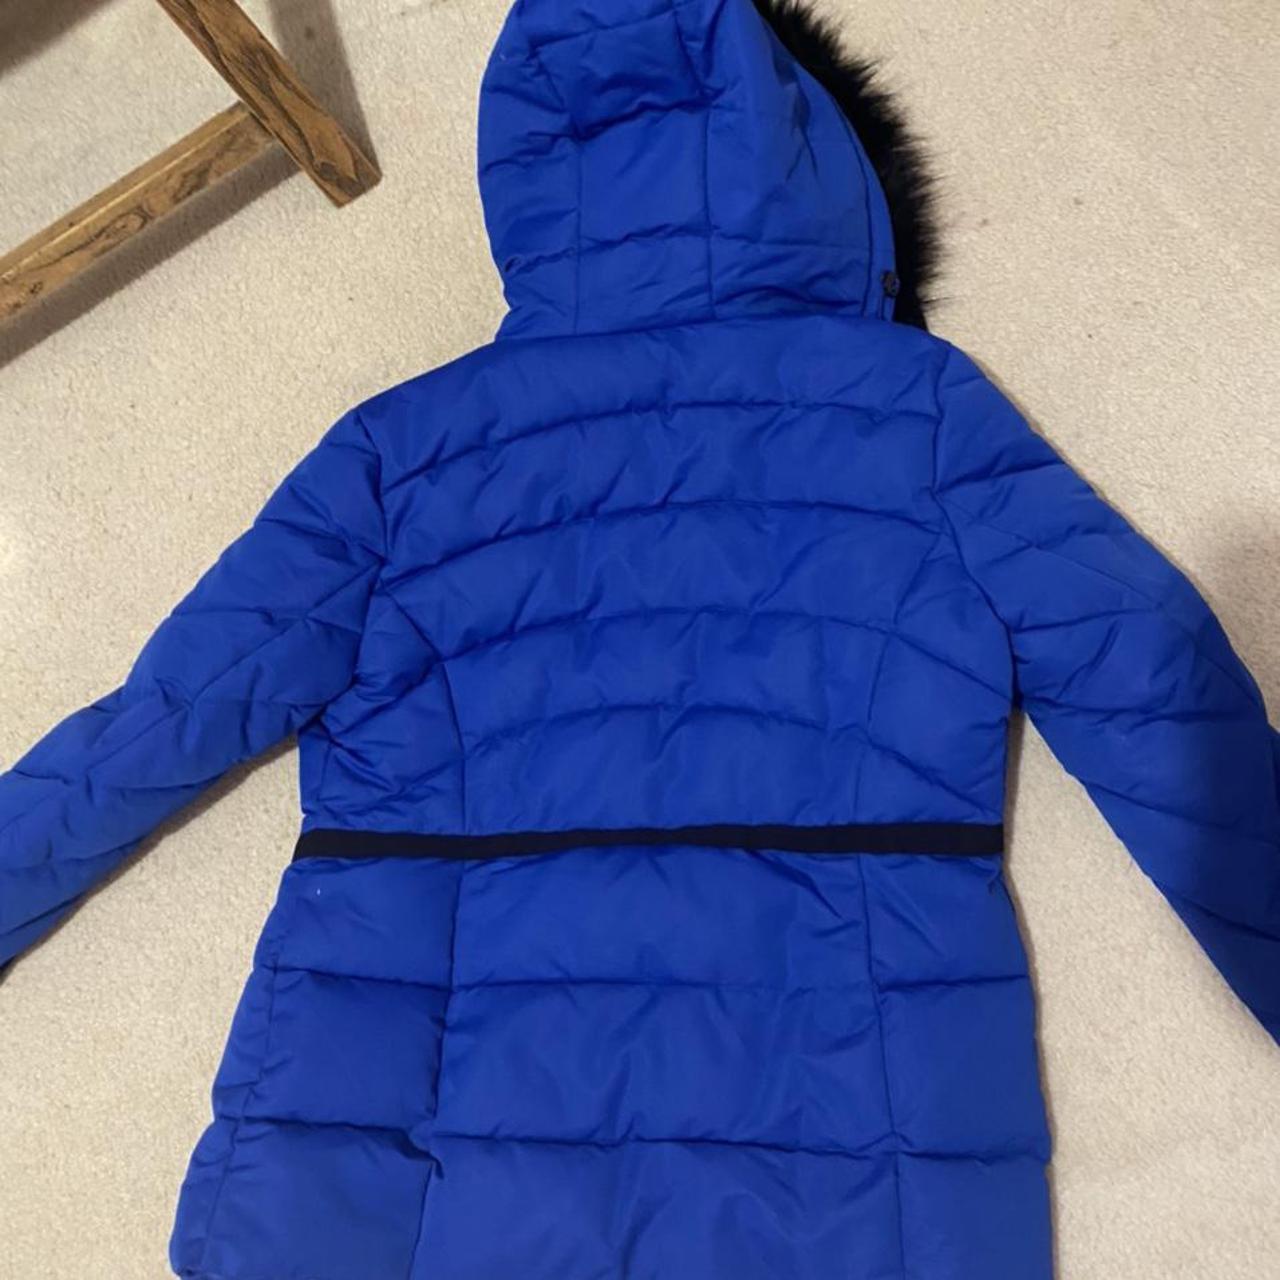 Gorgeous blue Guess winter jacket size medium with... - Depop